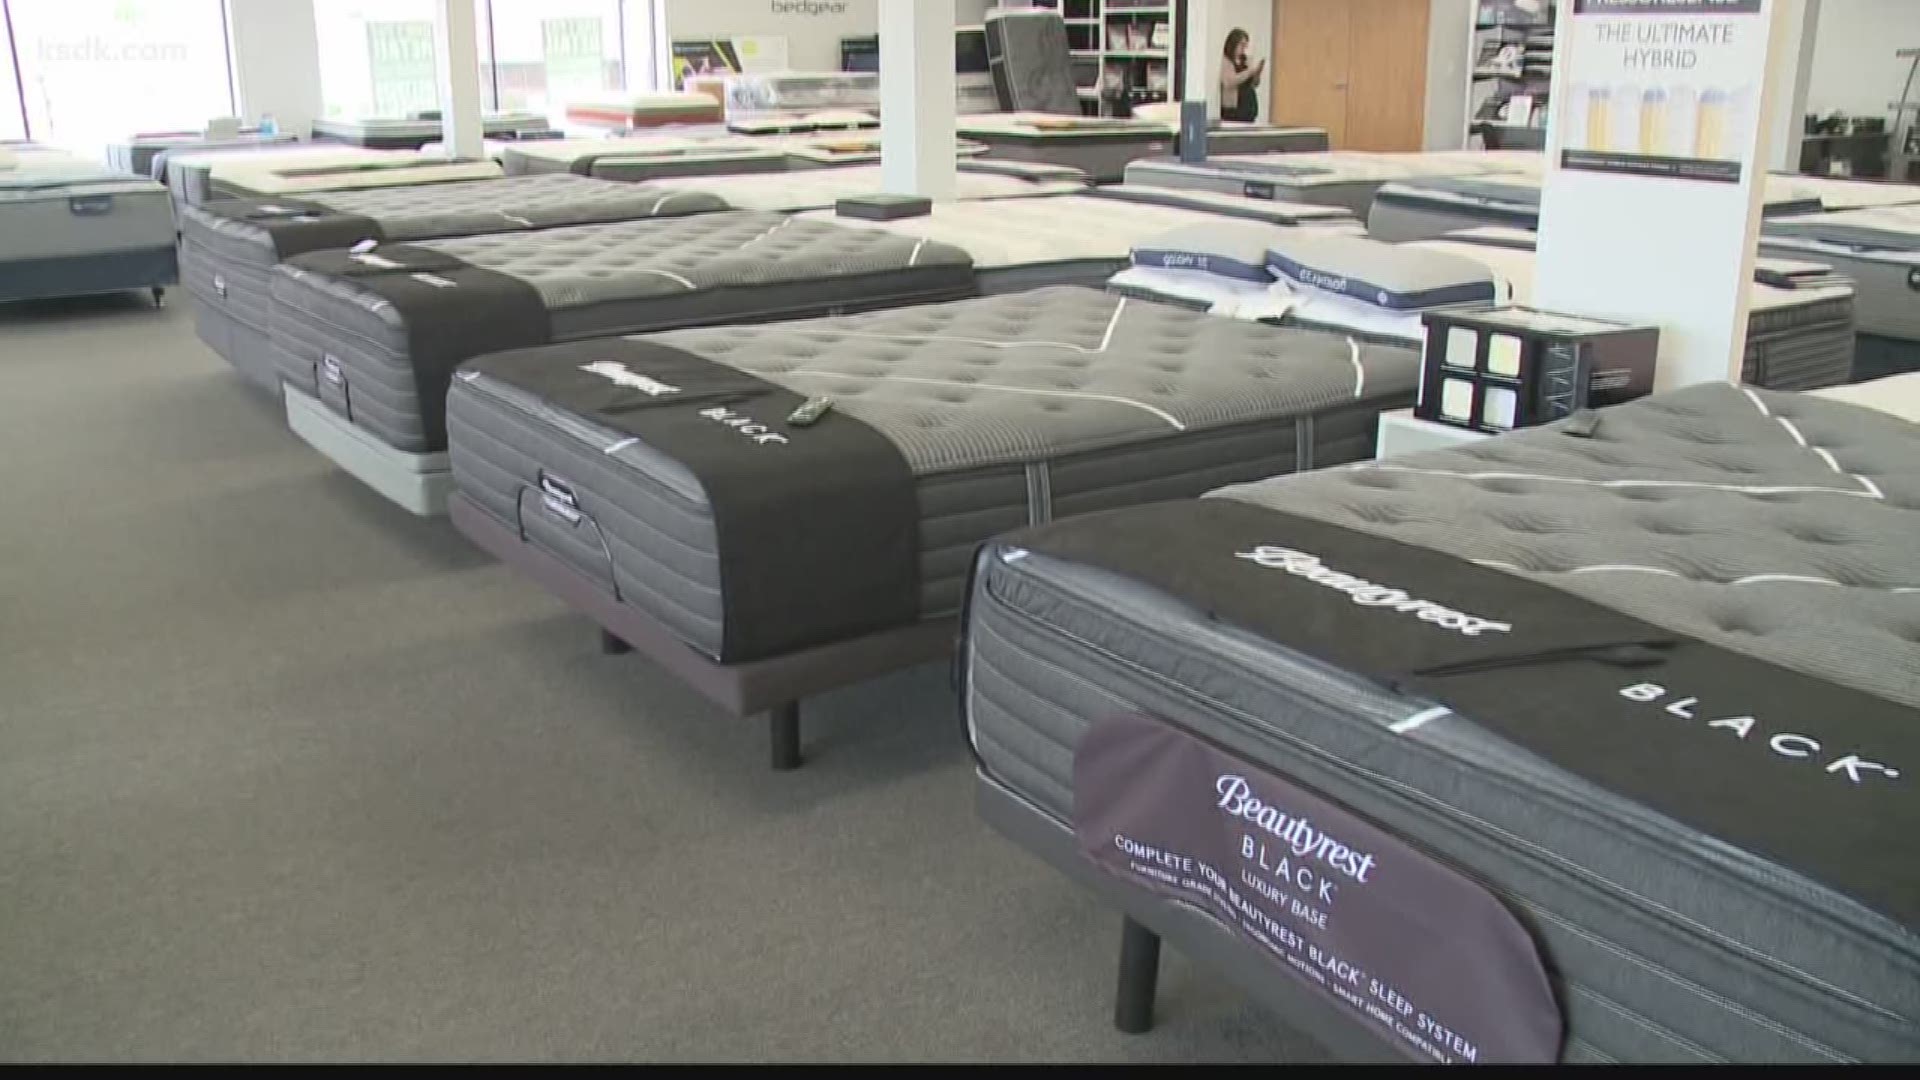 Mattress Direct can find you a great deal on the mattress you need.